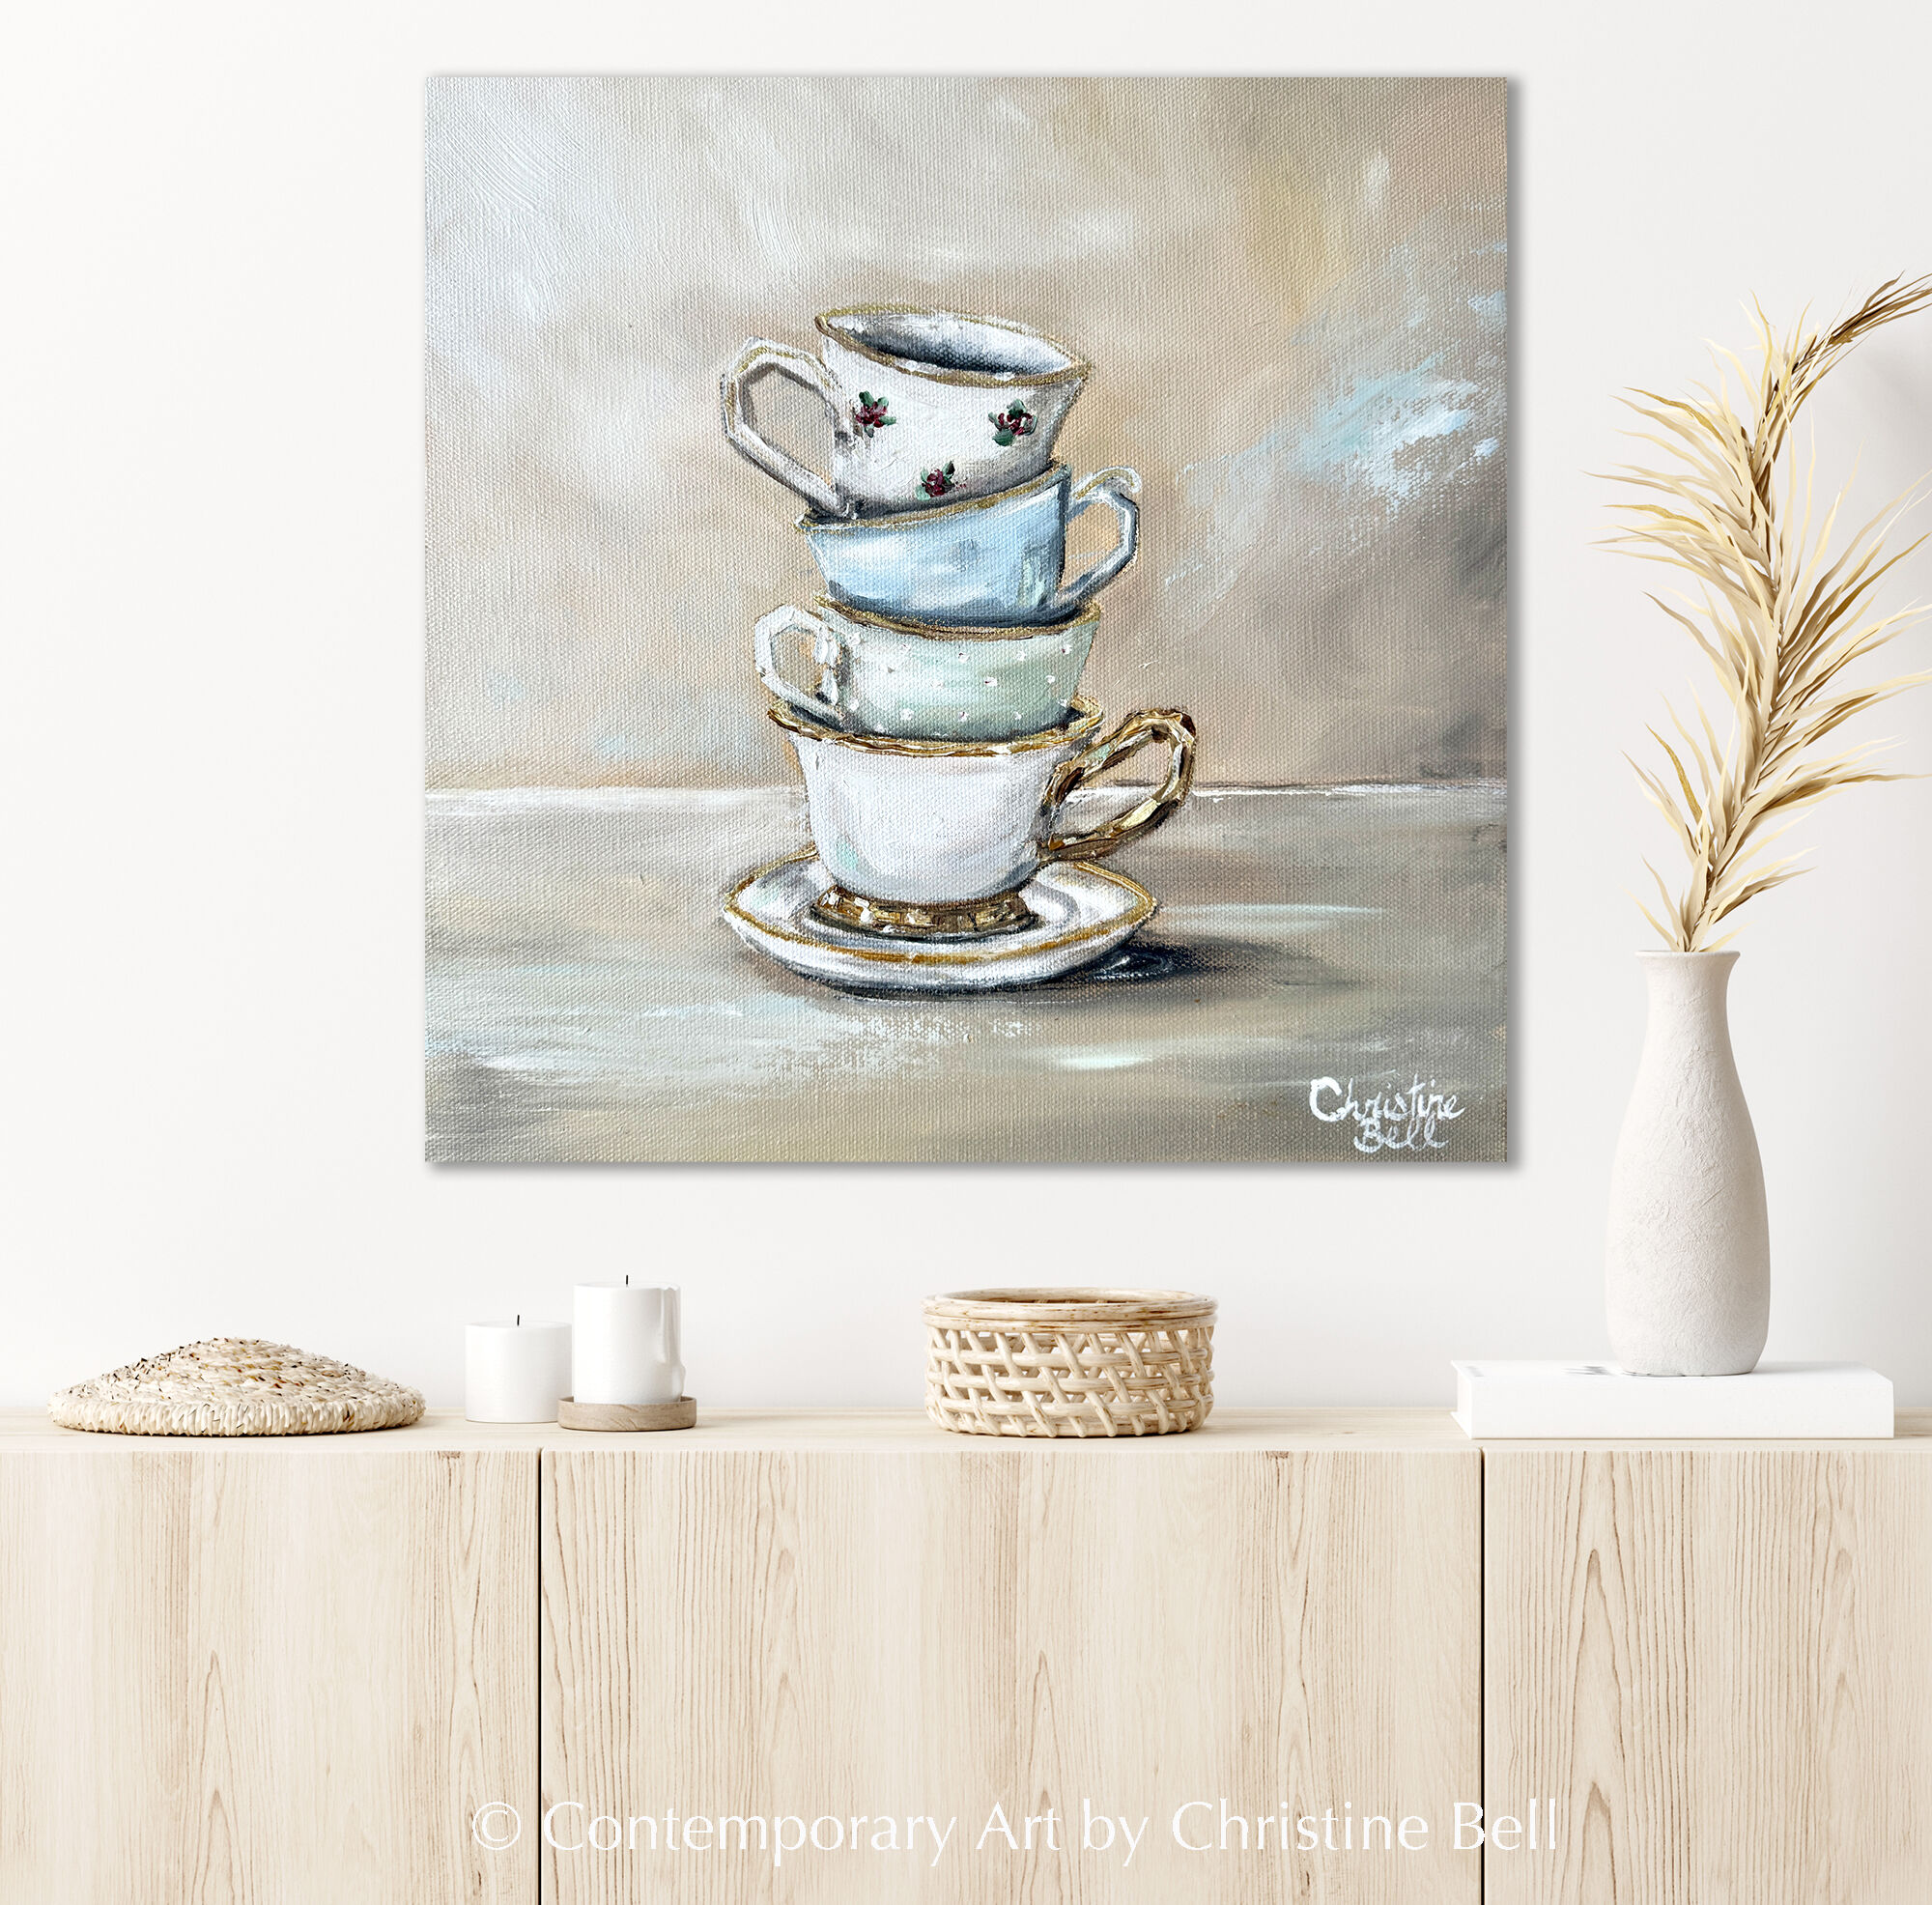 SHOP: The New Teacup Original Paintings and Prints